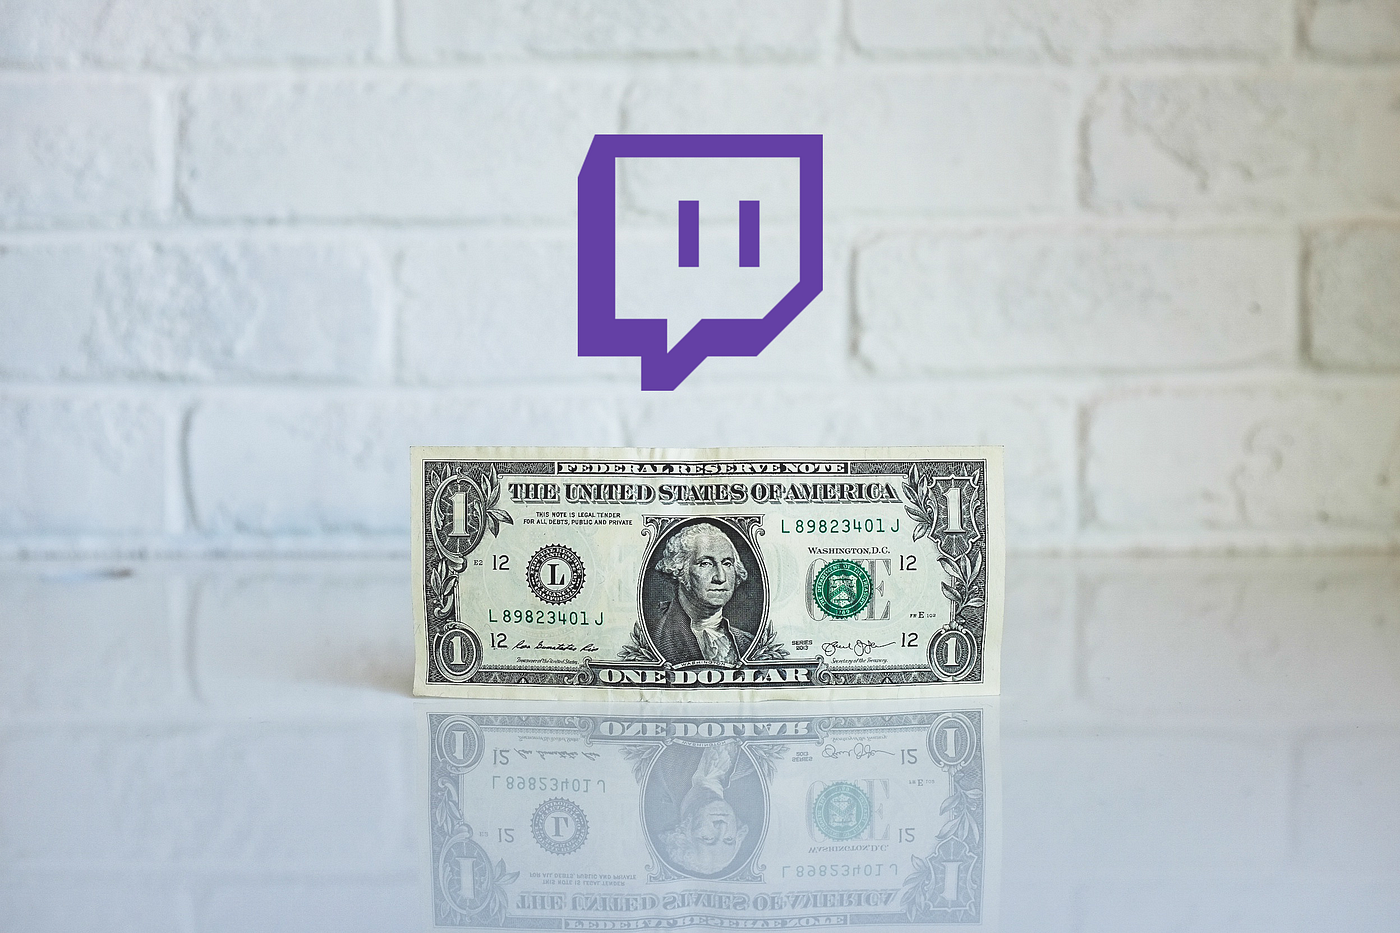 How 's Twitch Makes Money